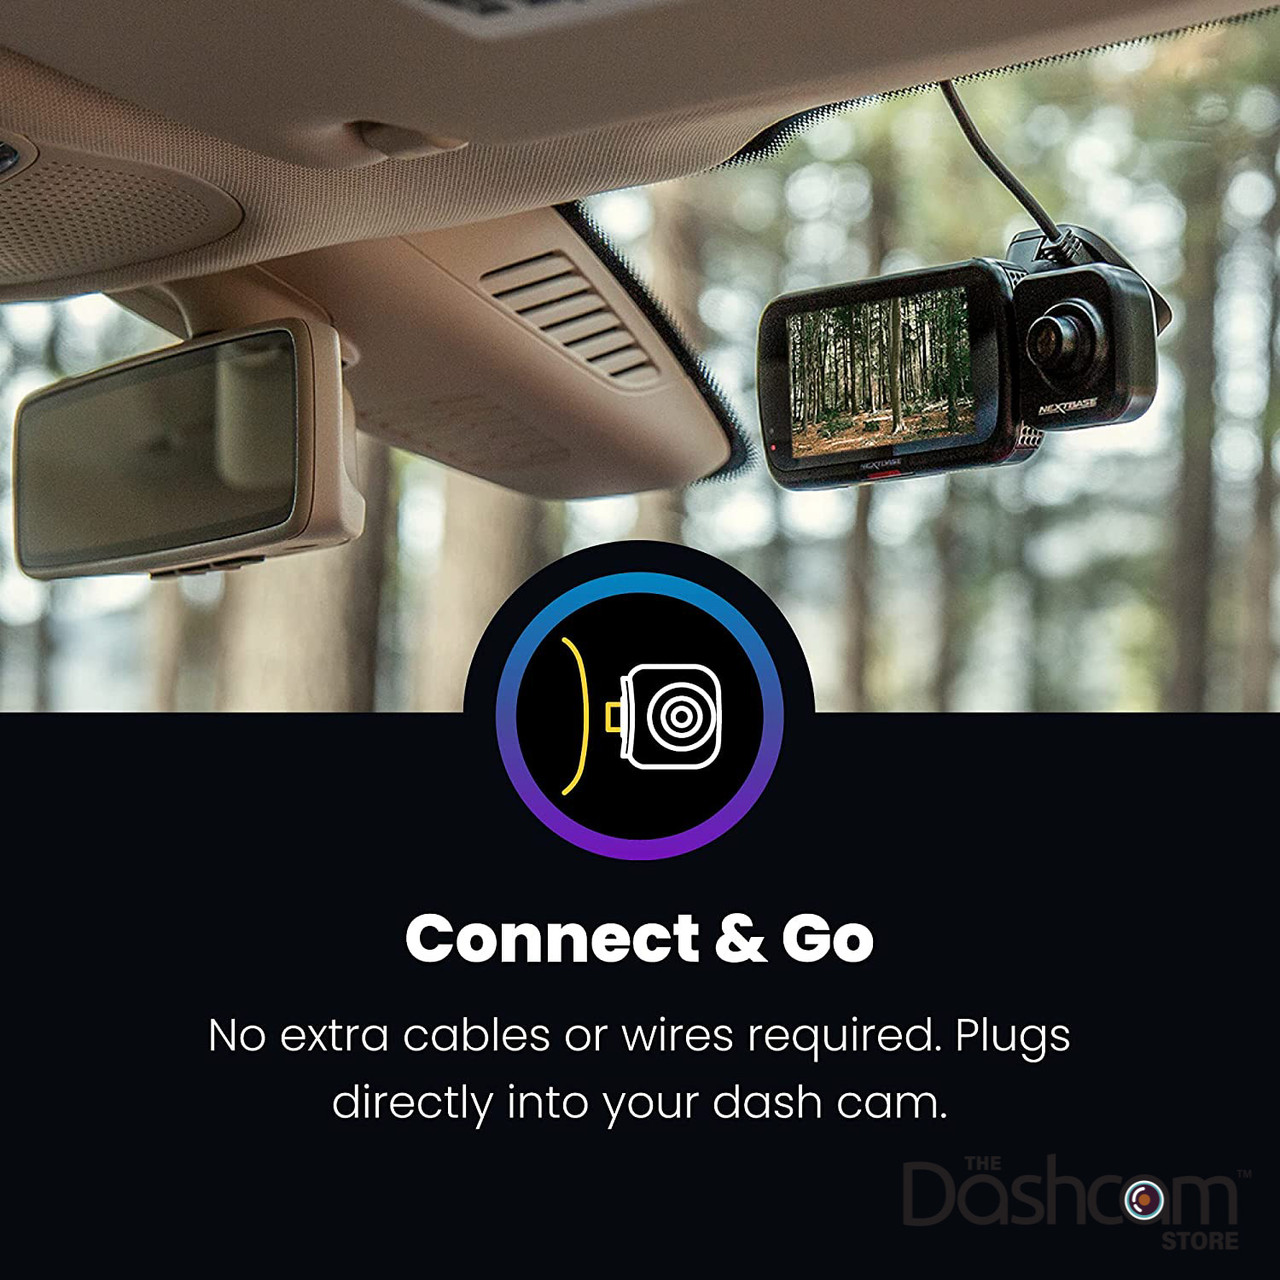 https://cdn11.bigcommerce.com/s-za60ms/images/stencil/1280x1280/products/801/10884/TheDashcamStore.com-nextbase-front-mounted-rear-view-camera-for-series-2-dash-cams-1__60526.1648753525.jpg?c=2